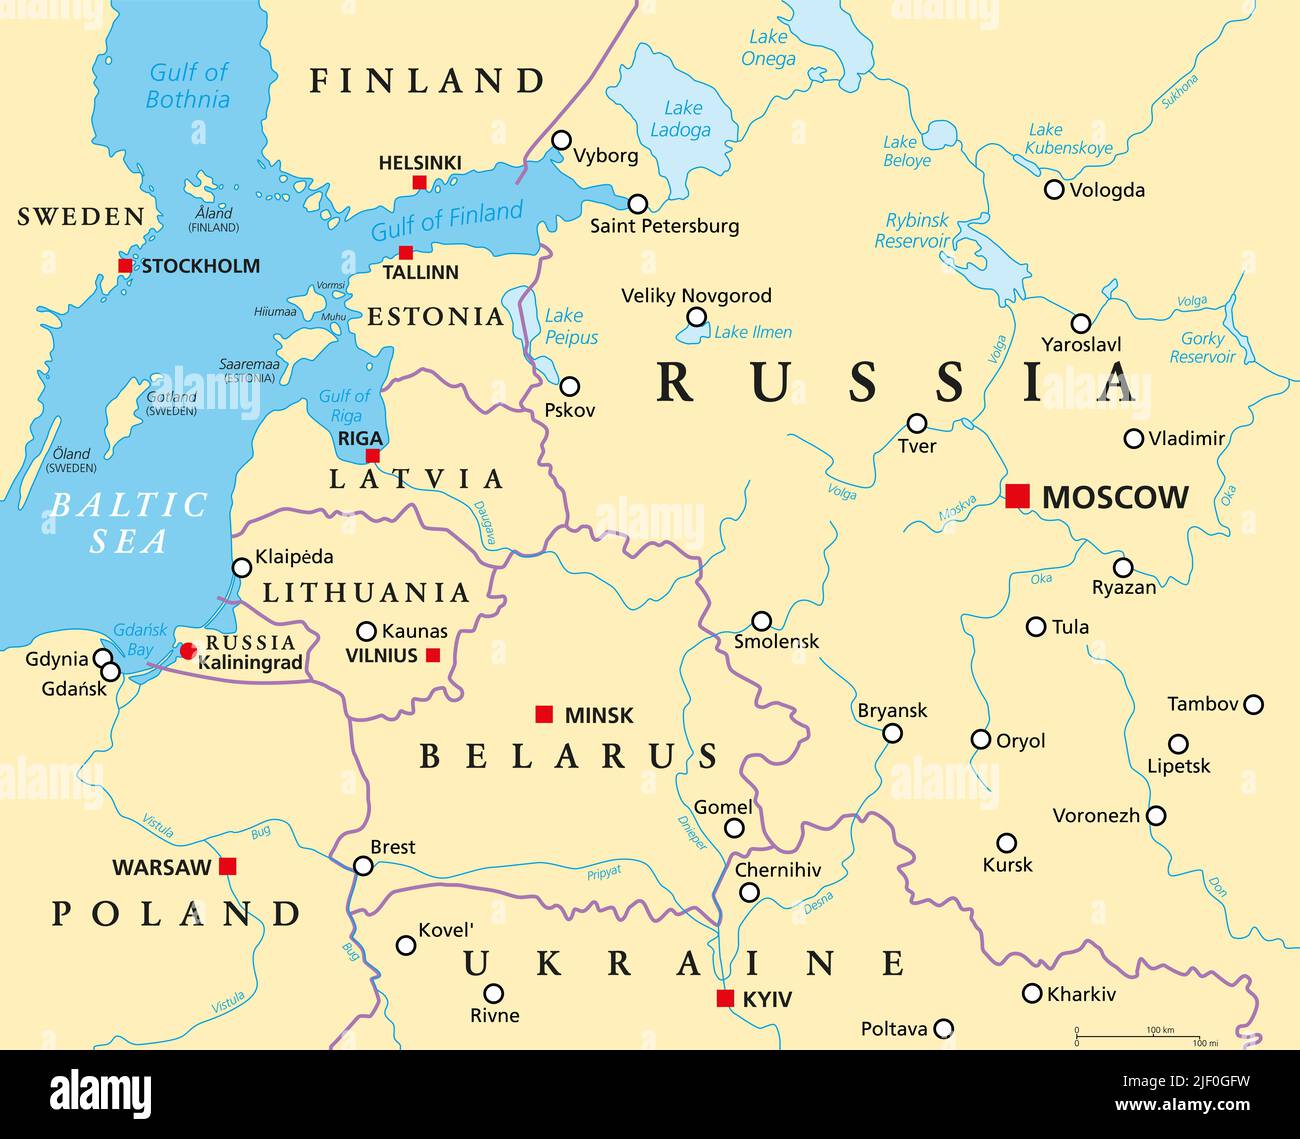 Baltic States and Kaliningrad, political map. From Finland to Estonia, Latvia and Lithuania, to Poland, from Russian exclave Kaliningrad to Moscow. Stock Photo